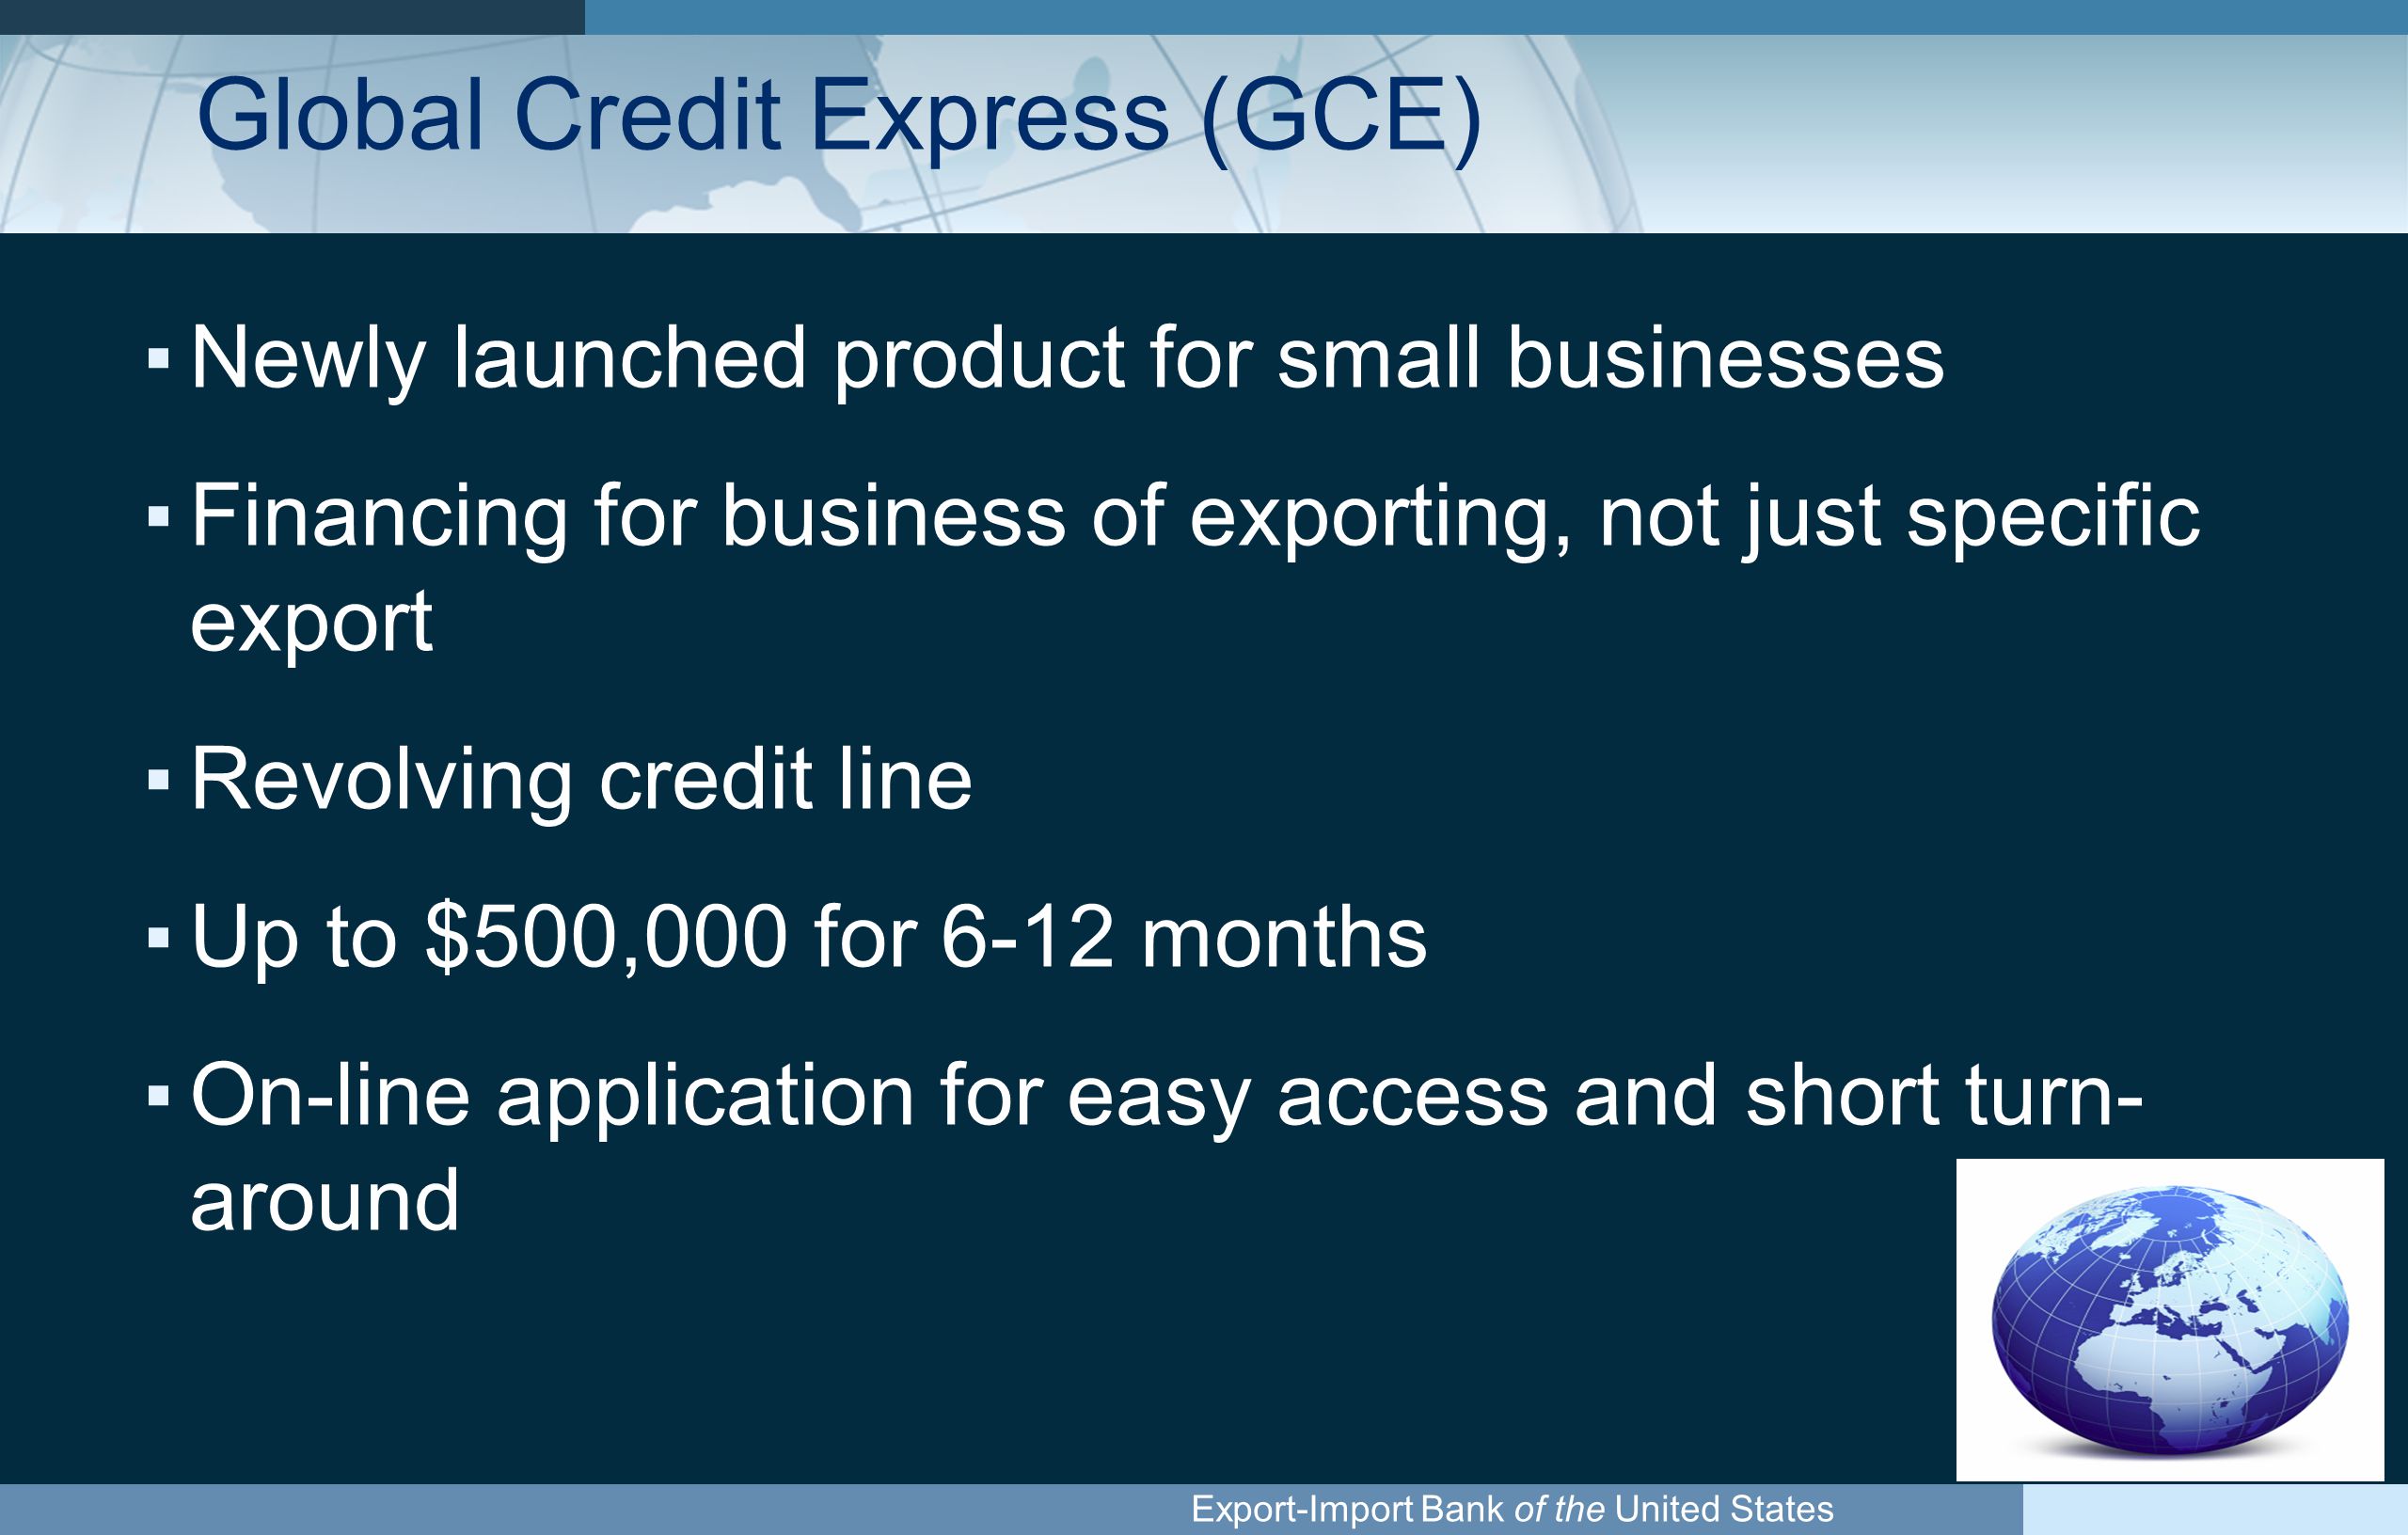 Export-Import Bank of the United States Global Credit Express (GCE) ▪Newly launched product for small businesses ▪Financing for business of exporting, not just specific export ▪Revolving credit line ▪Up to $500,000 for 6-12 months ▪On-line application for easy access and short turn- around